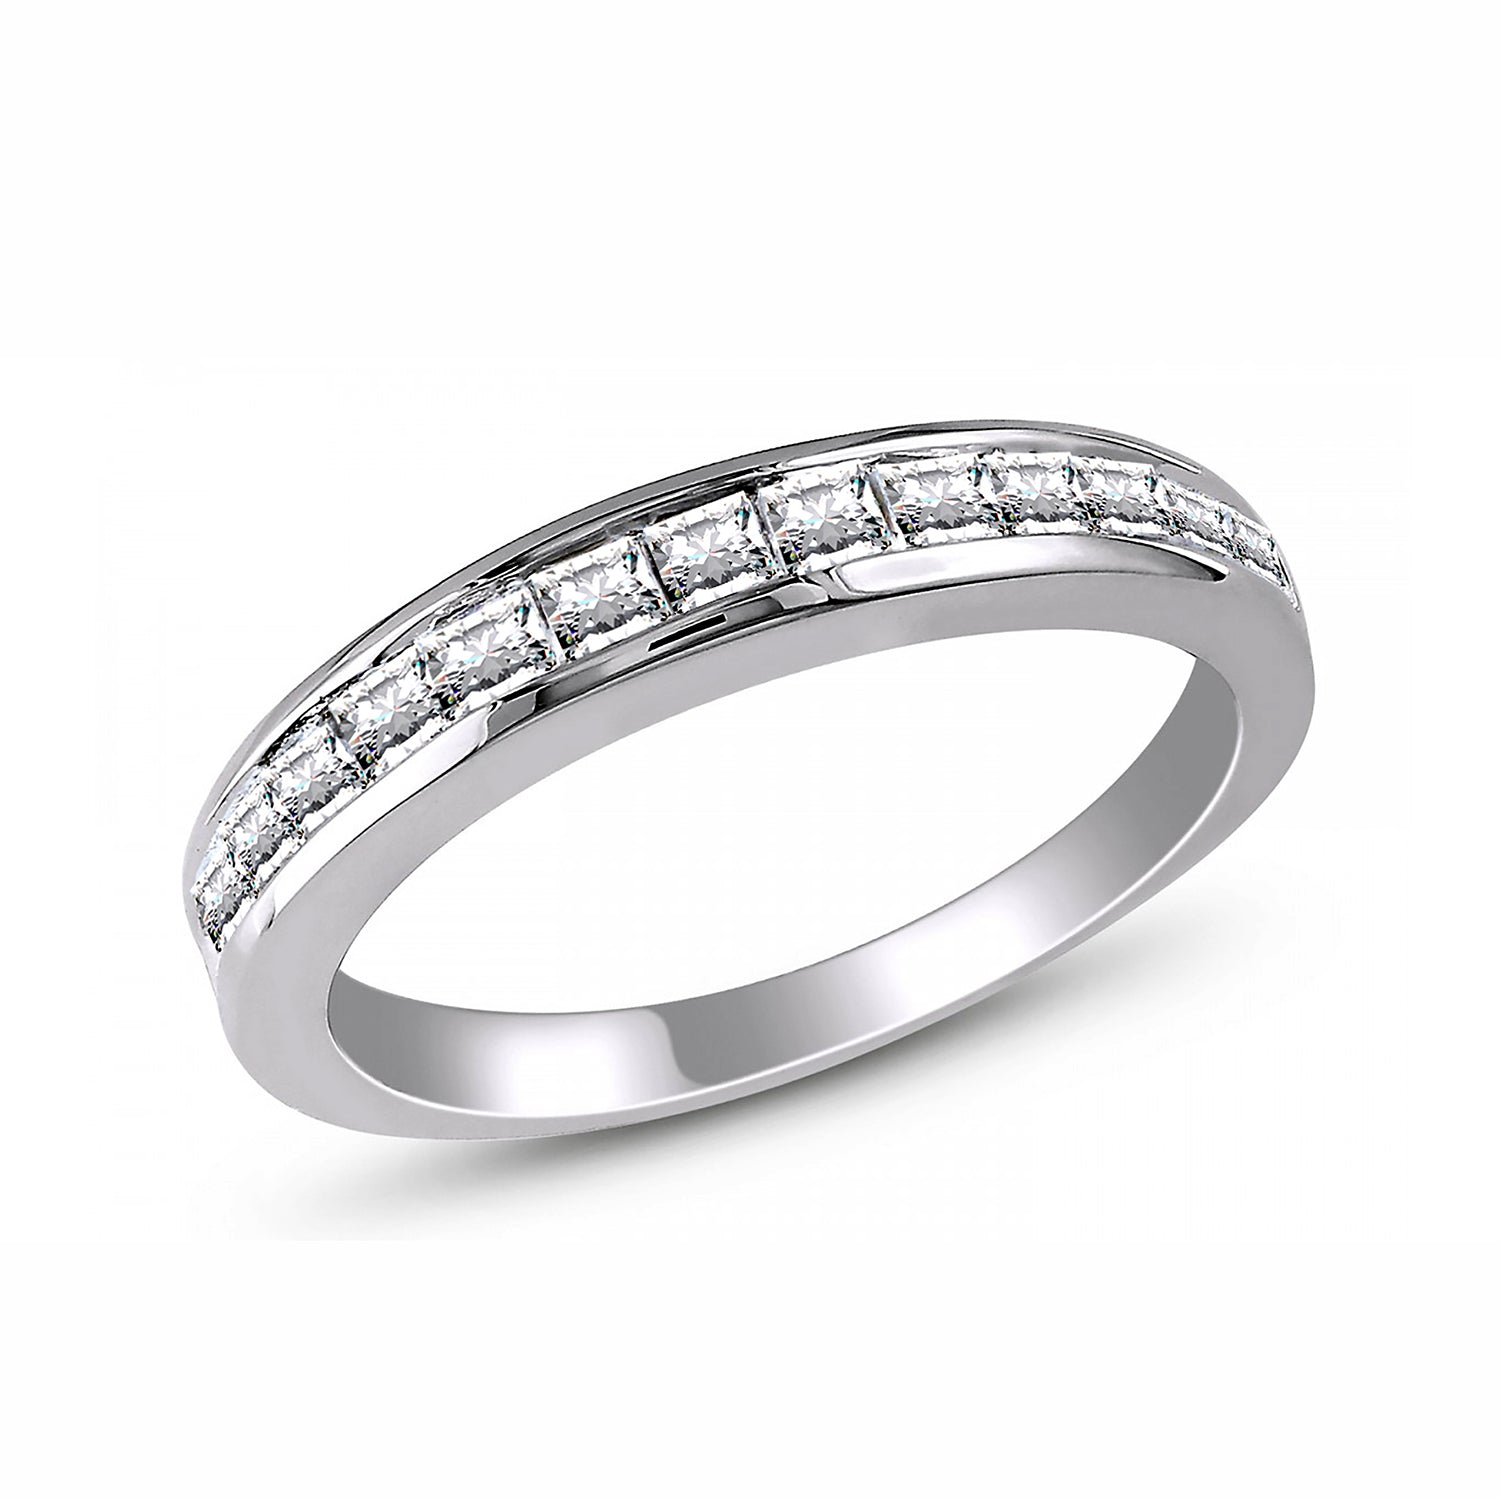 Georgia Anniversary Band Ring Cz Silver Princess Womens Ginger Lyne Collection - 10